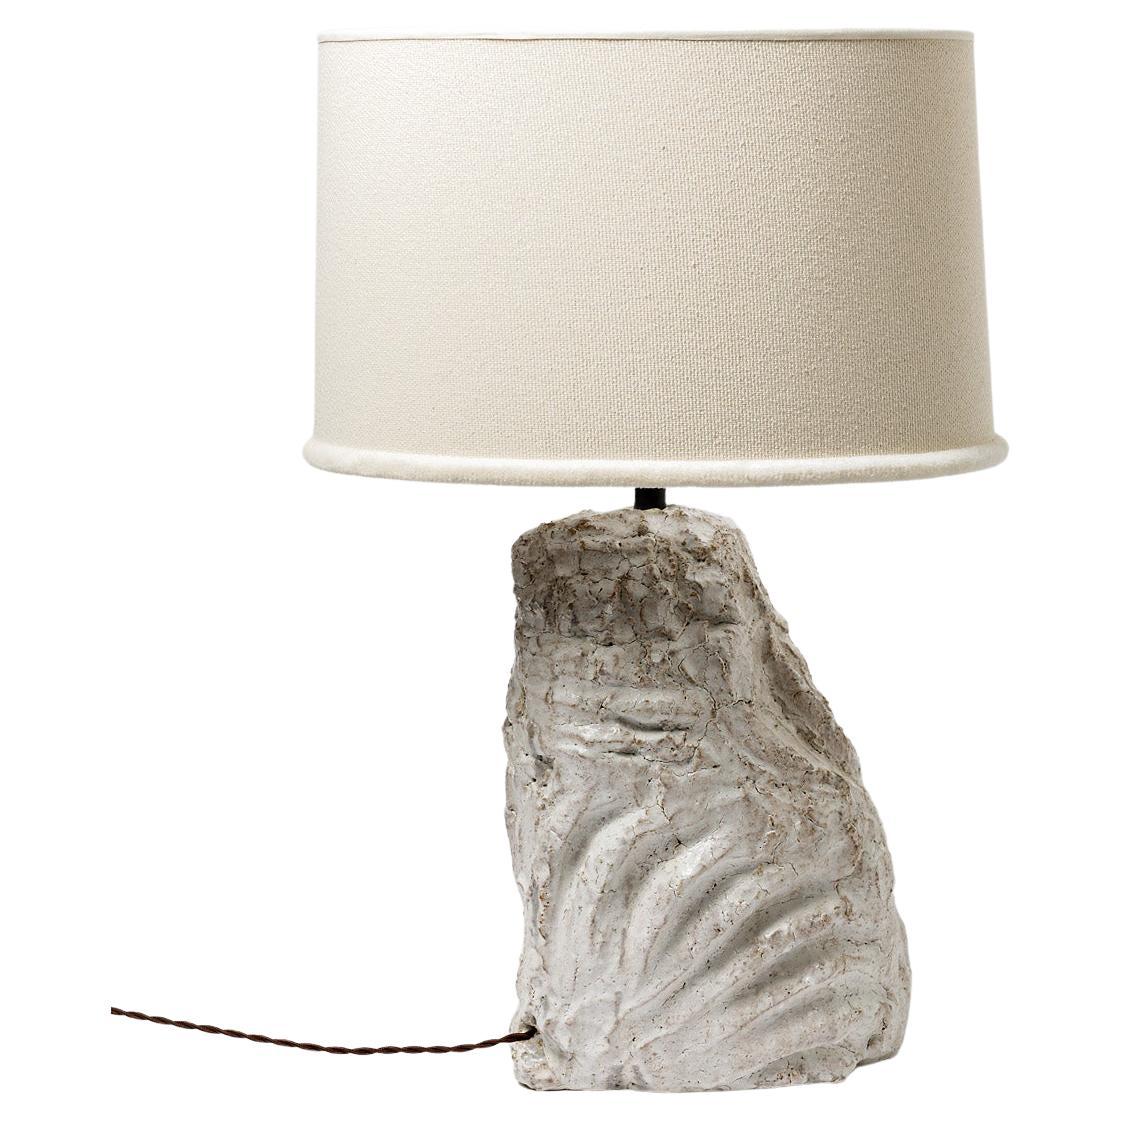 Ceramic Table Lamp with White Glaze by Hervé Rousseau, 2022 / Ref 8 For Sale